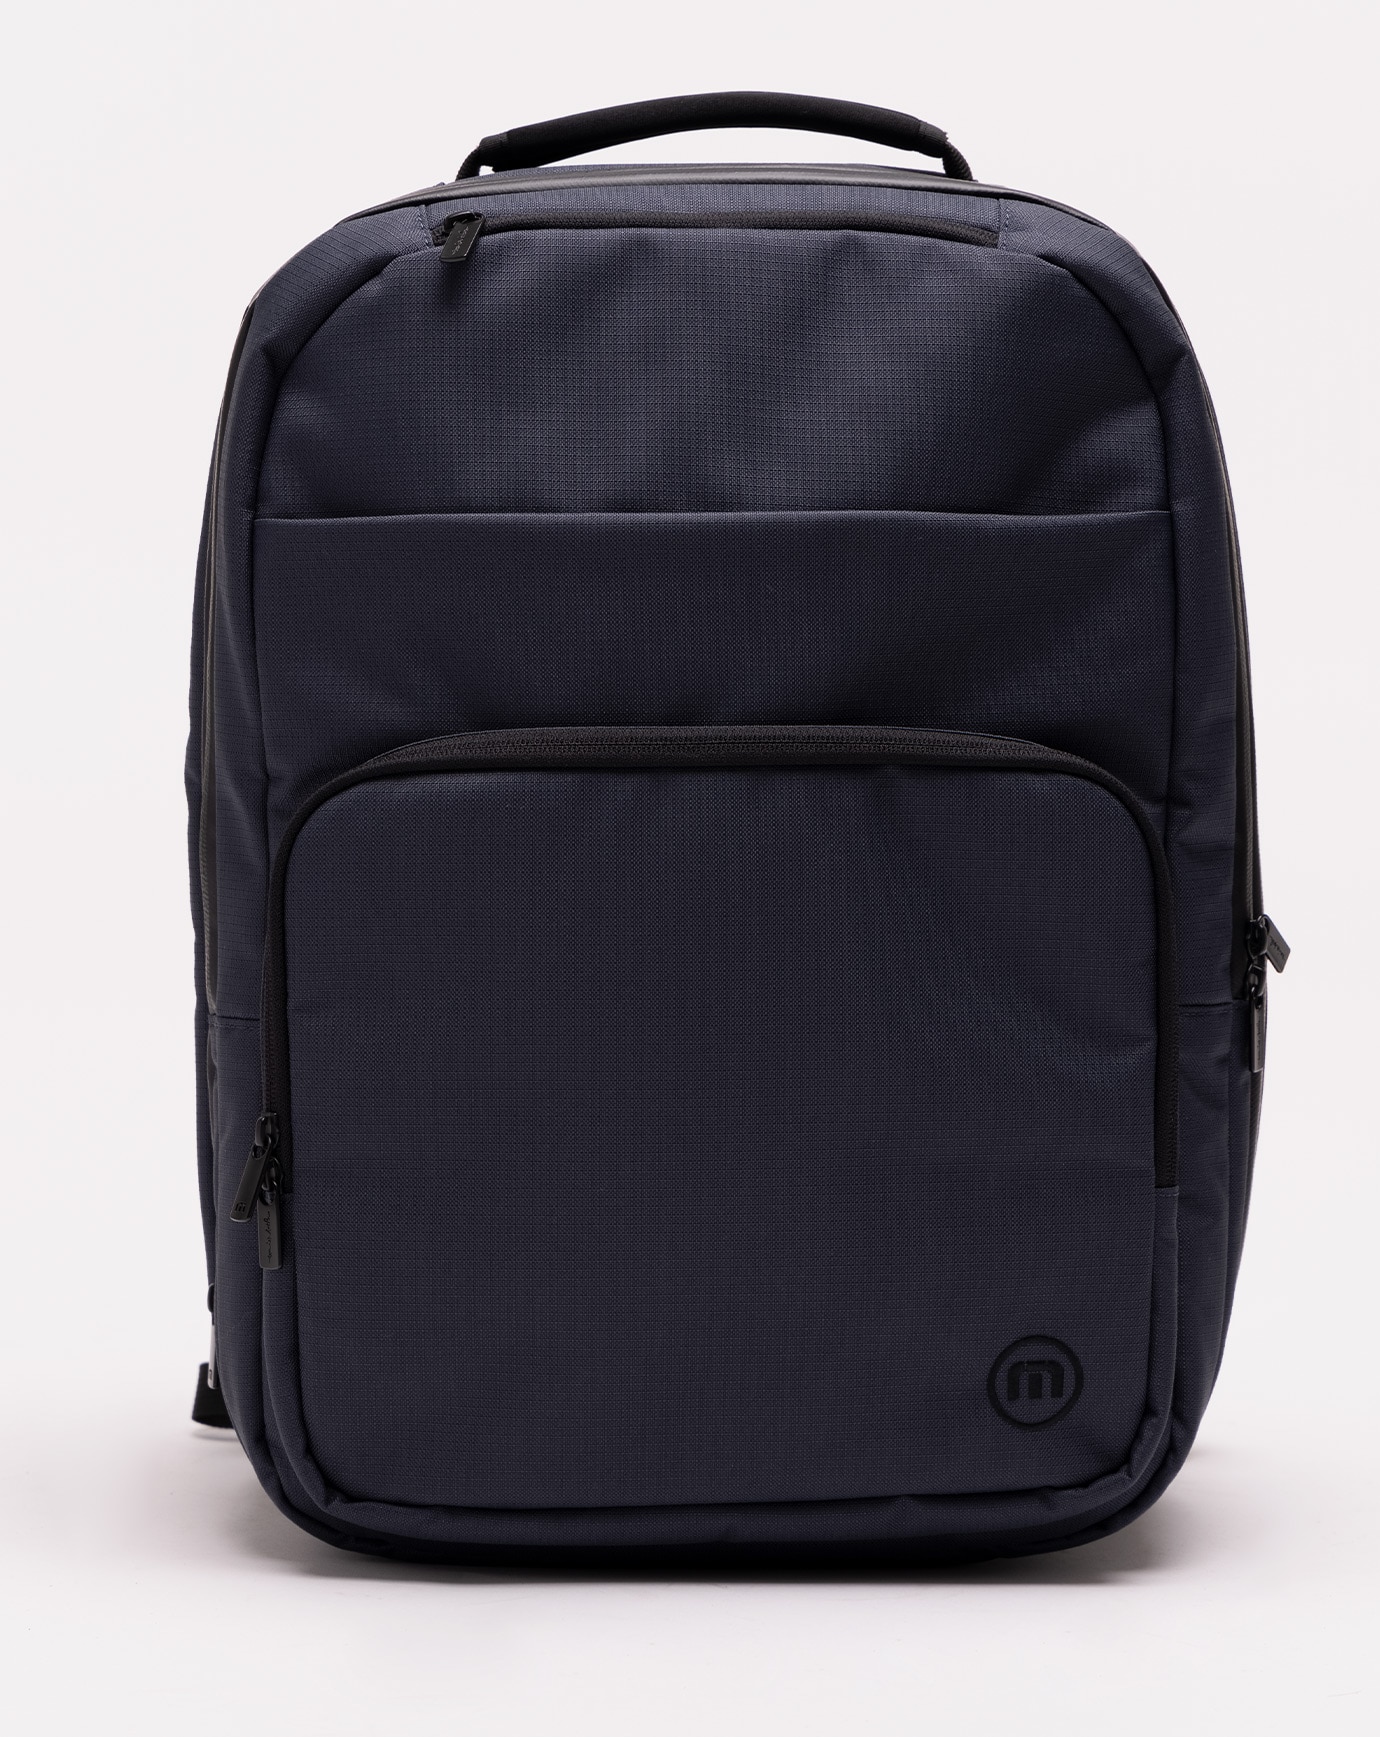 1ST CLASS BACKPACK Image Thumbnail 1